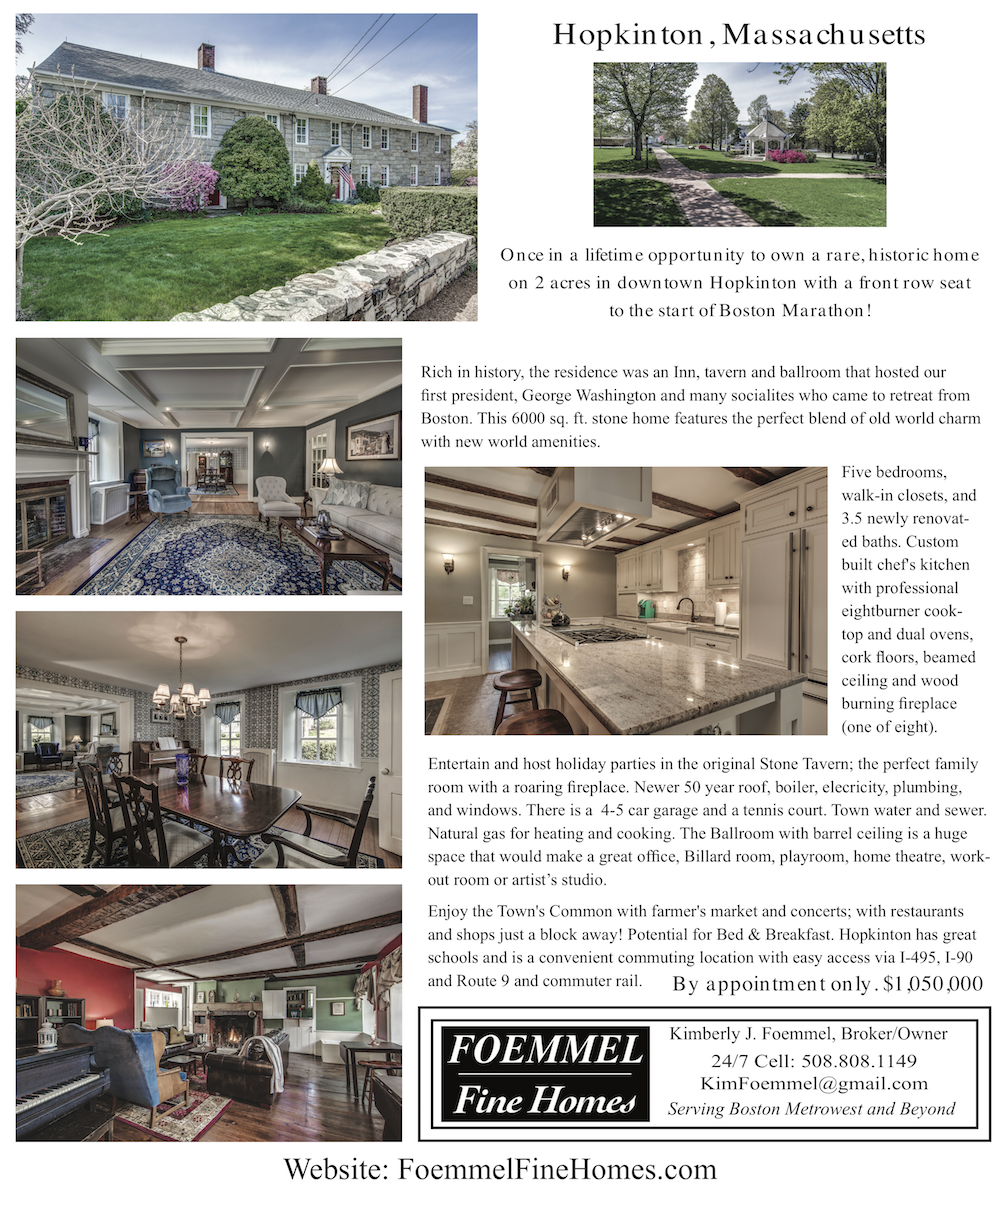 5 East Main Street In Hopkinton Was Featured In Antique Homes Magazine Kim Foemmel 508 808 1149 Hopkinton Ma Homes For Sale